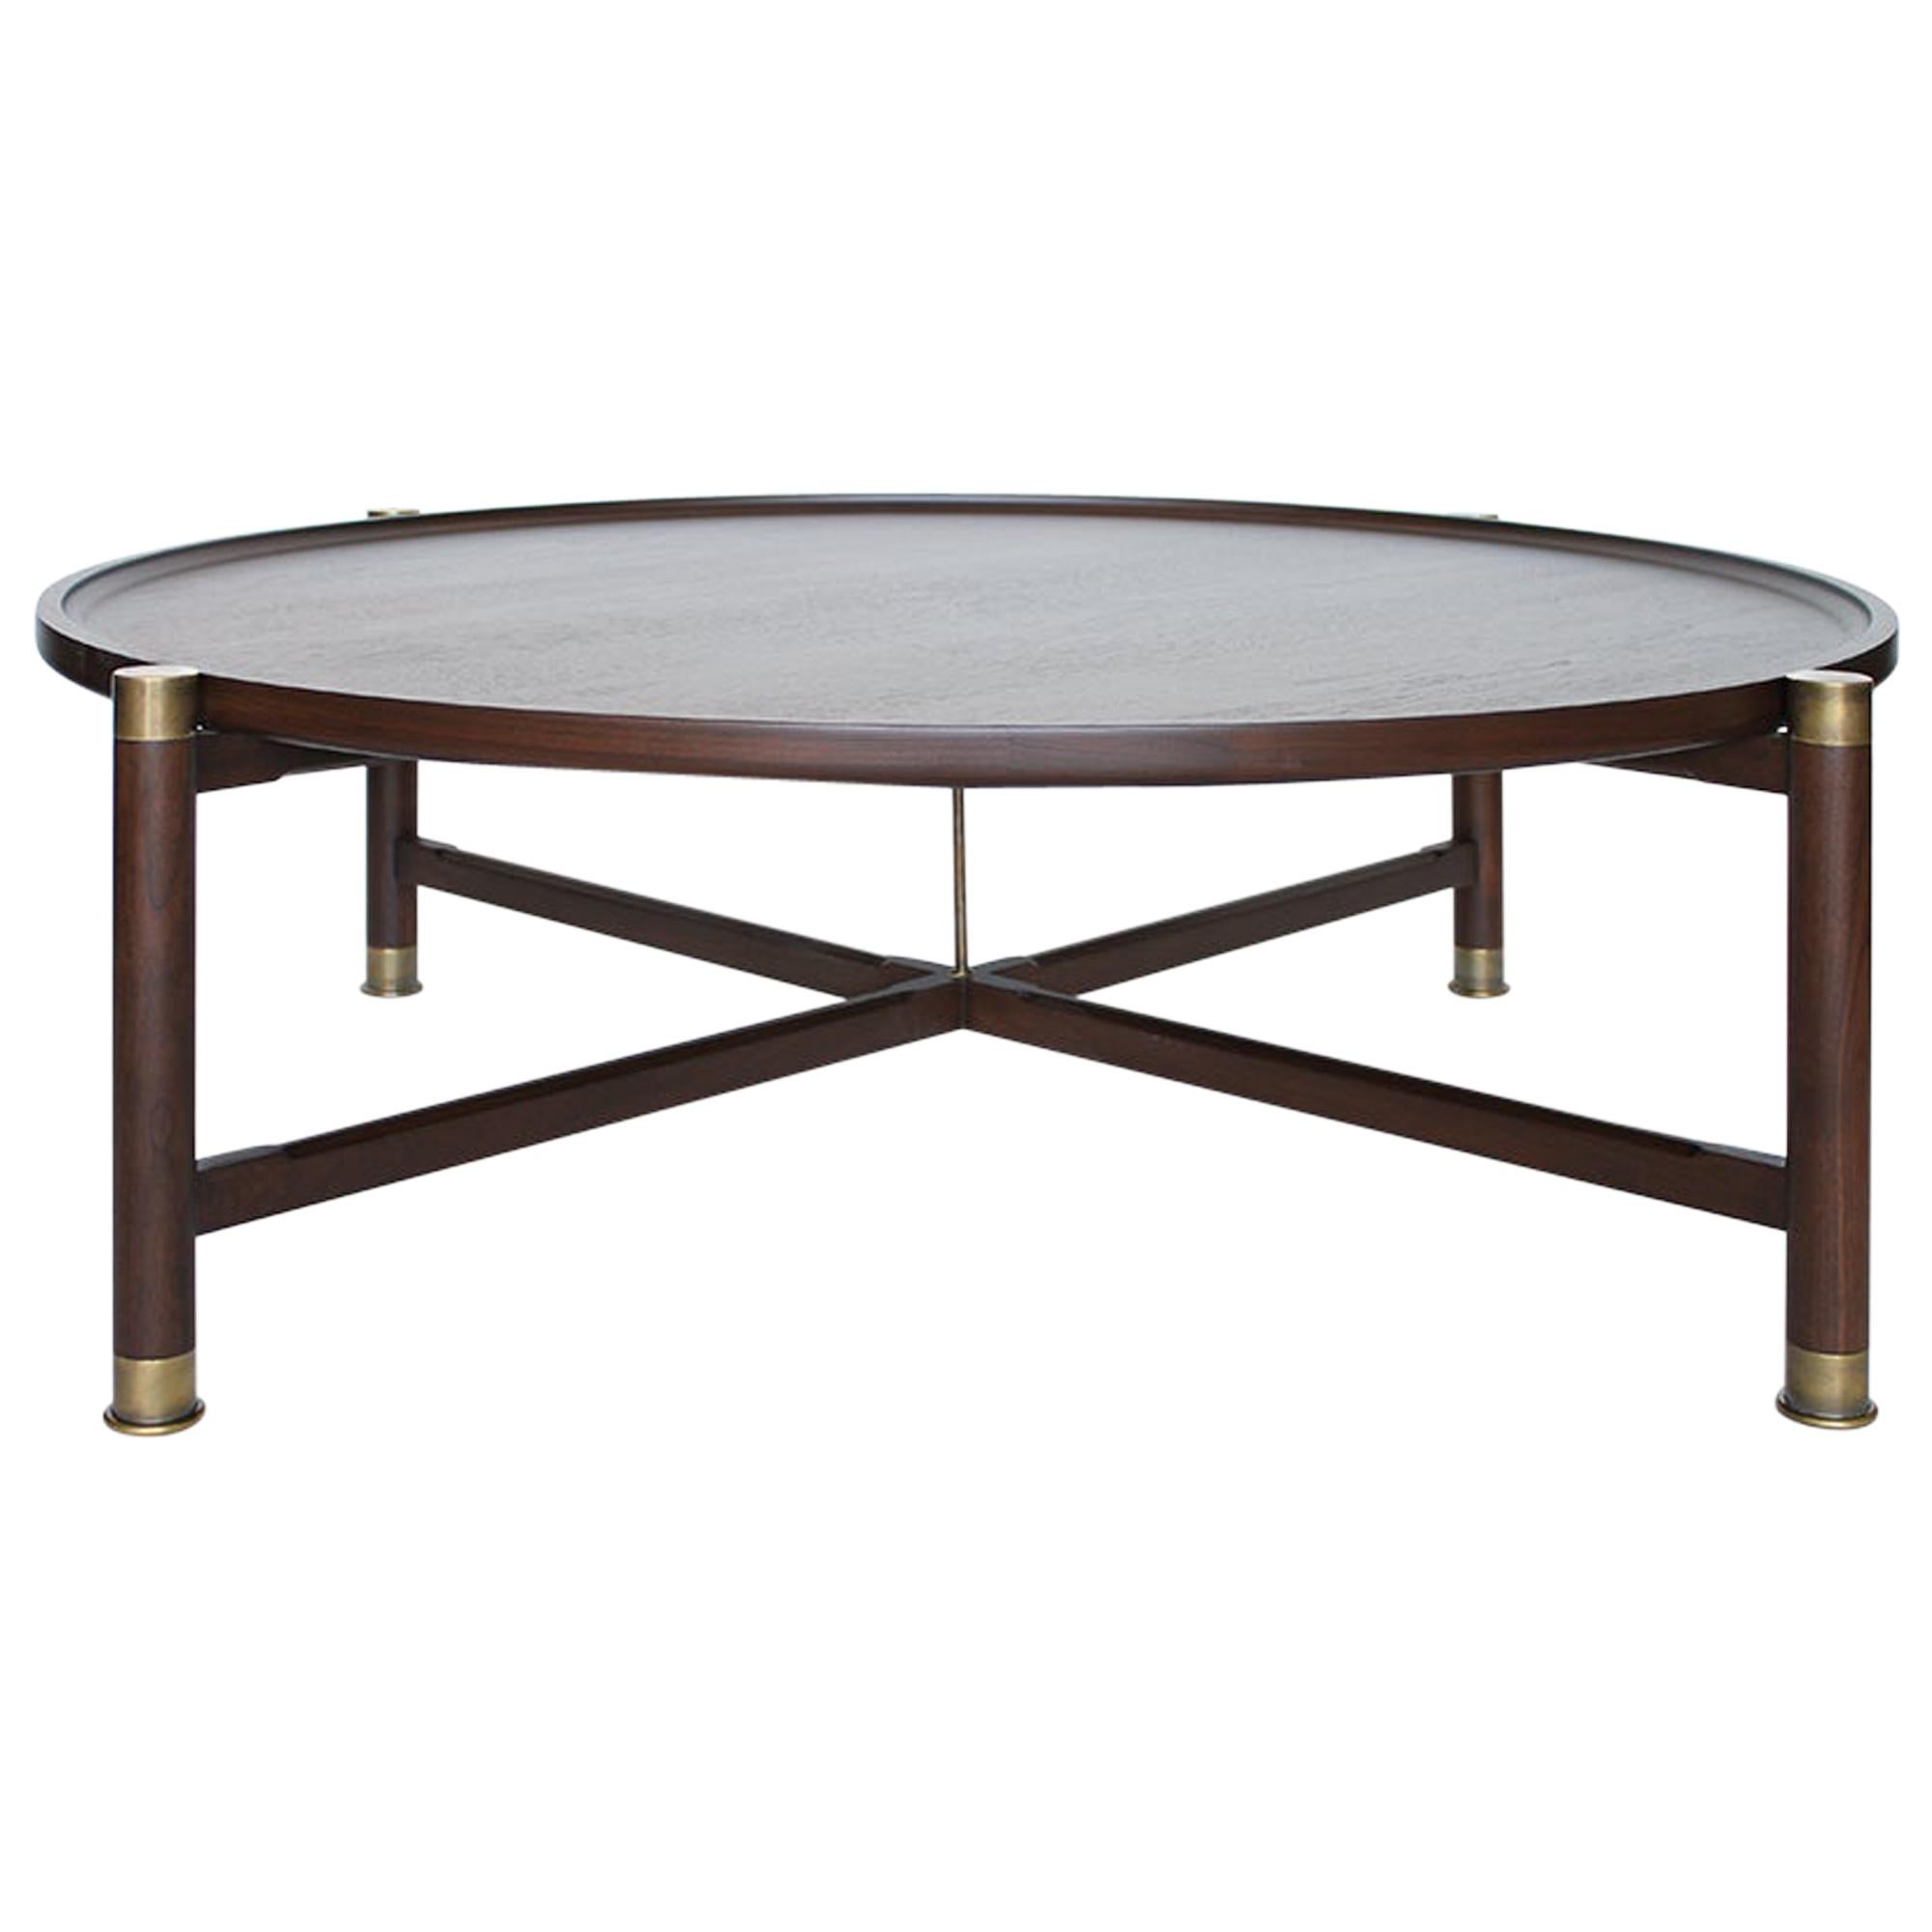 Otto Round Coffee Table in Medium Walnut with Antique Brass Fittings and Stem For Sale